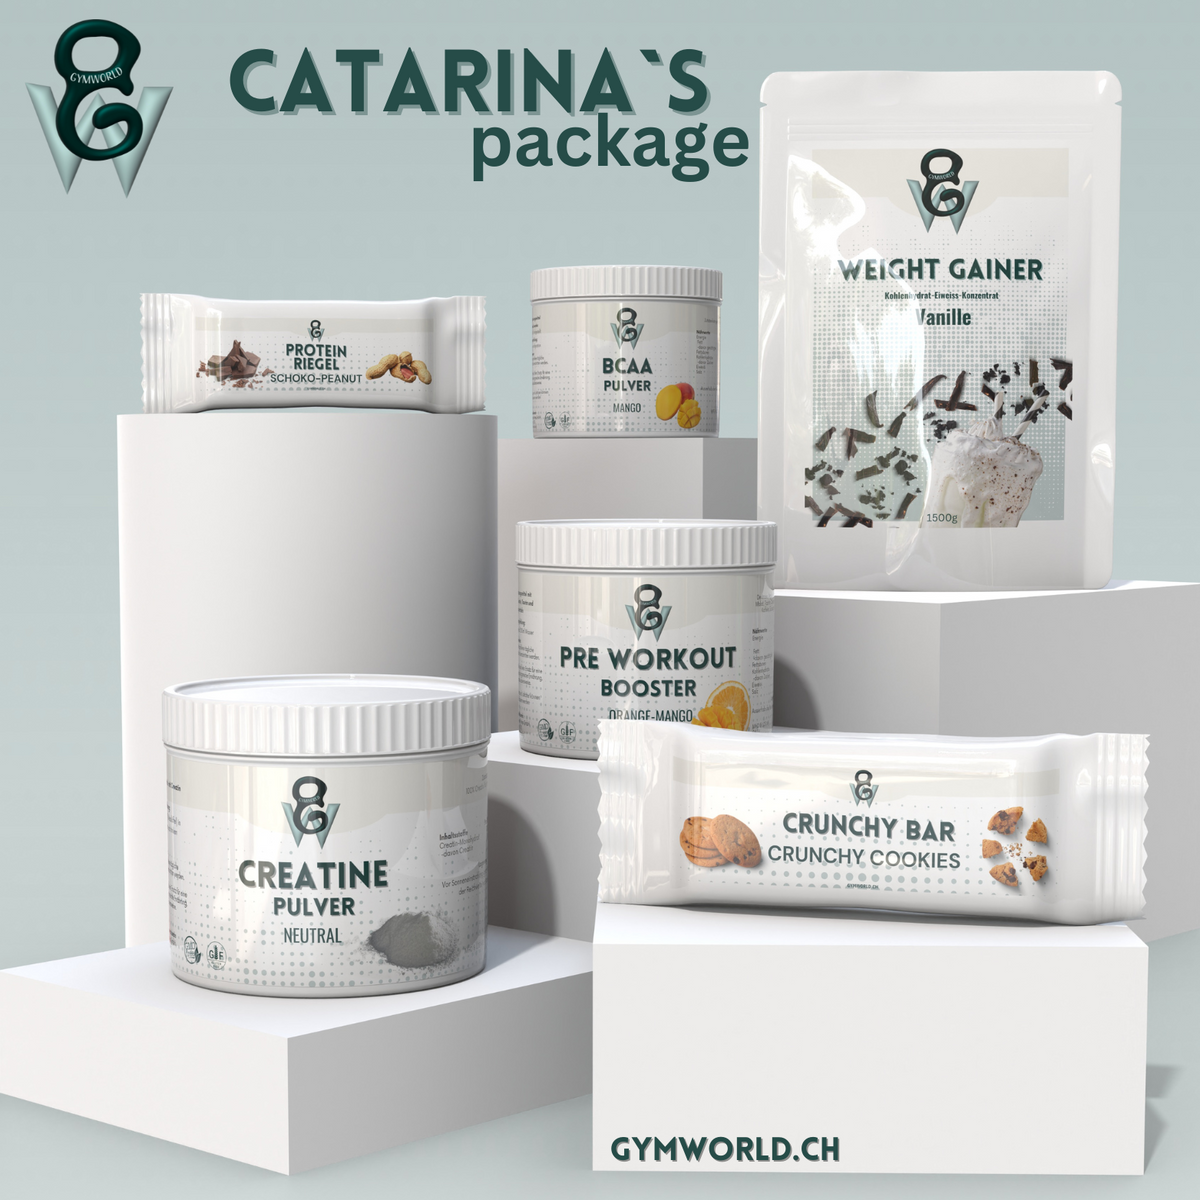 CATARINA'S PACKAGE